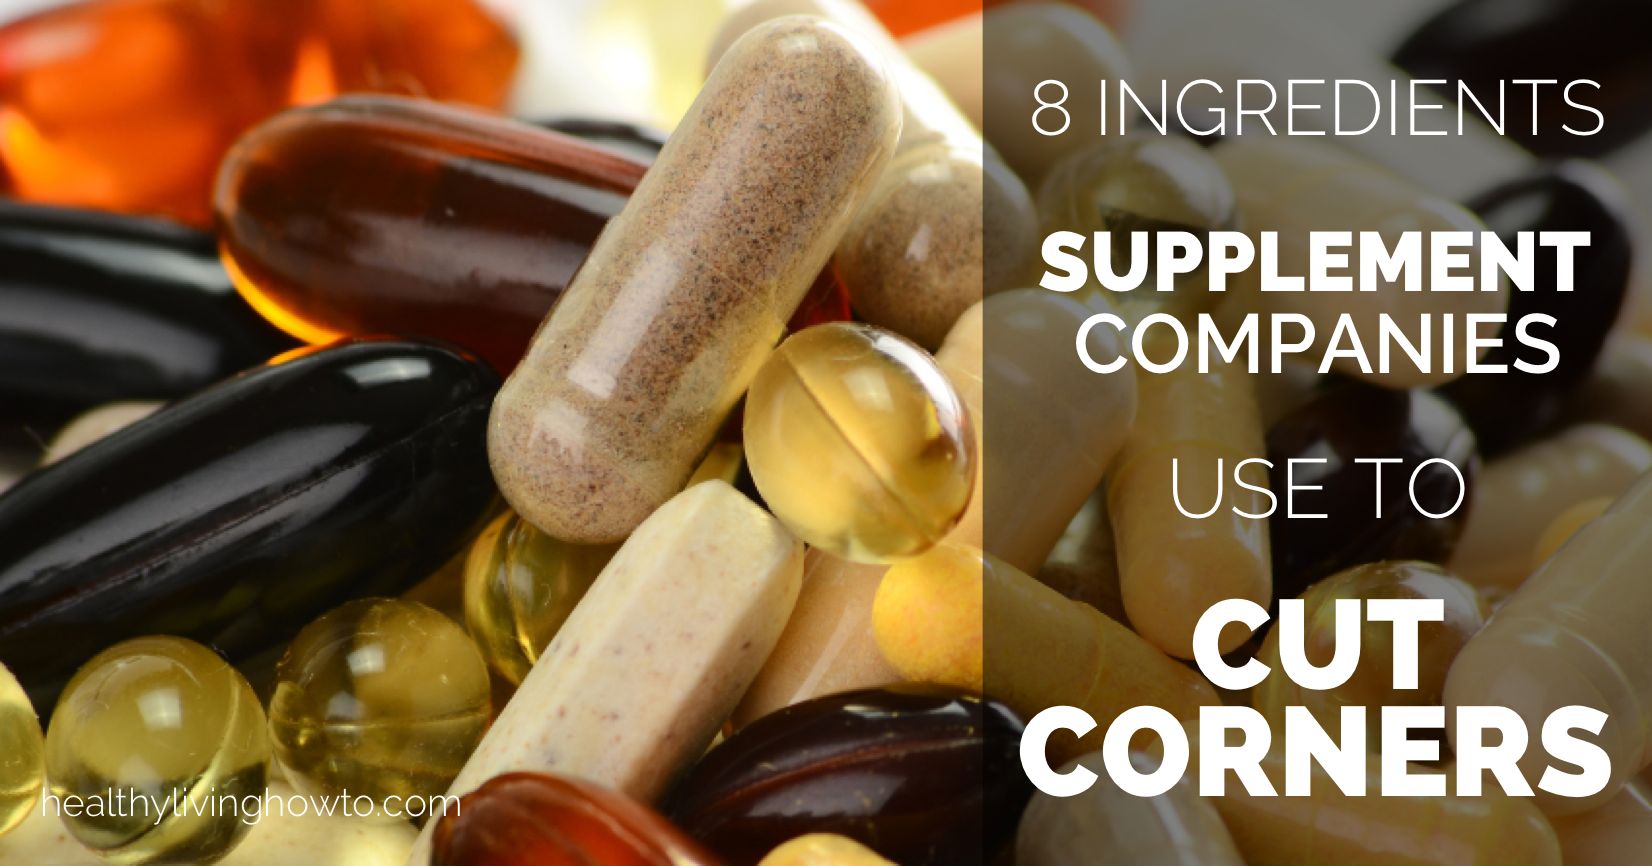 8 Ingredients Supplement Companies Use To Cut Corners | healthylivinghowto.com